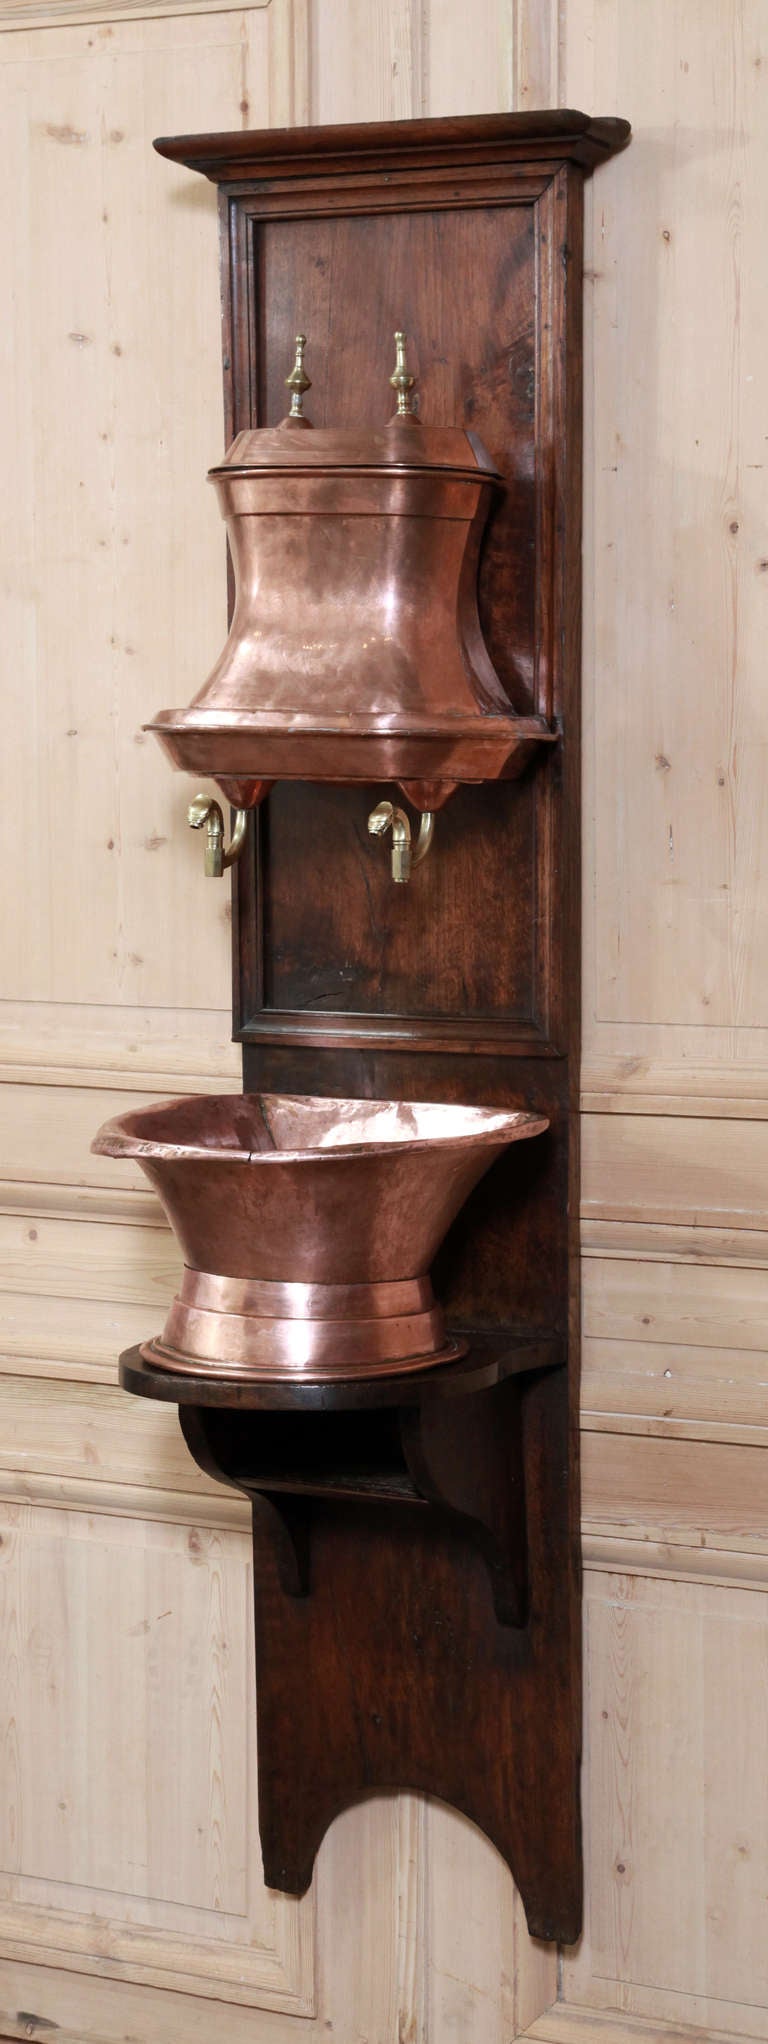 Antique French Copper Wall Fountain or as French call it Lavabo.
Circa 1780s. 
Please note that the prices on our website are updated far more frequently than on 1stDibs, and that we have thousands more items that will never appear on 1stDibs that